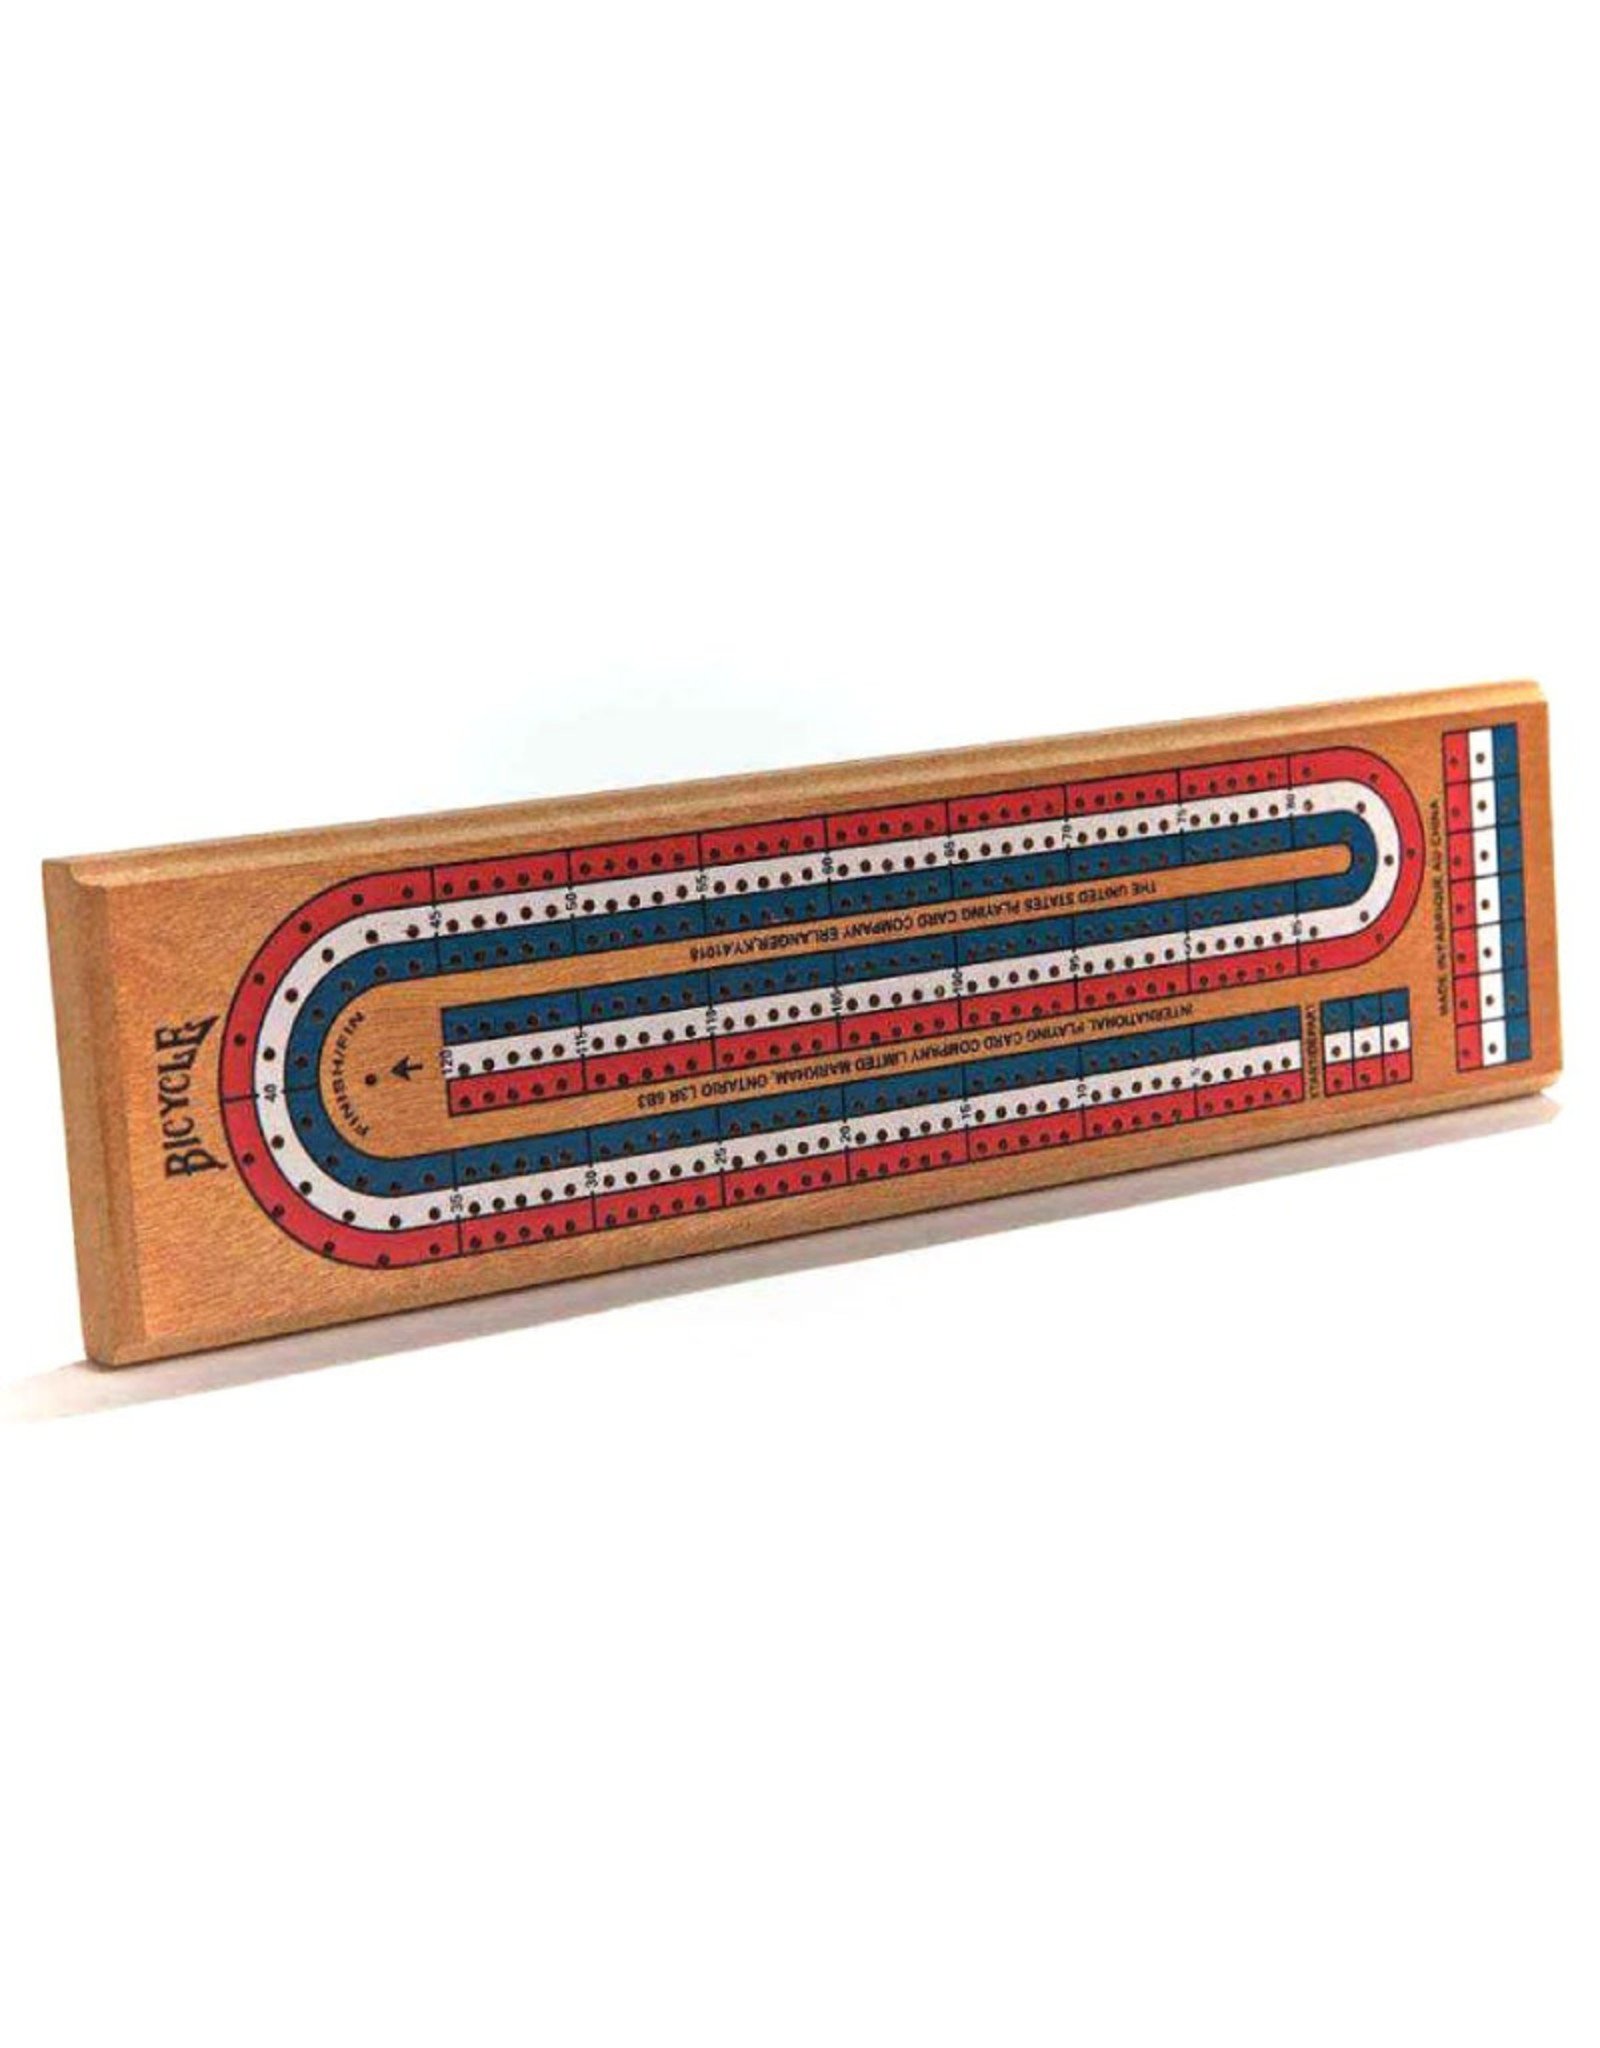 United States Playing Card Co Cribbage: 3 Track (Red, Green, Blue)